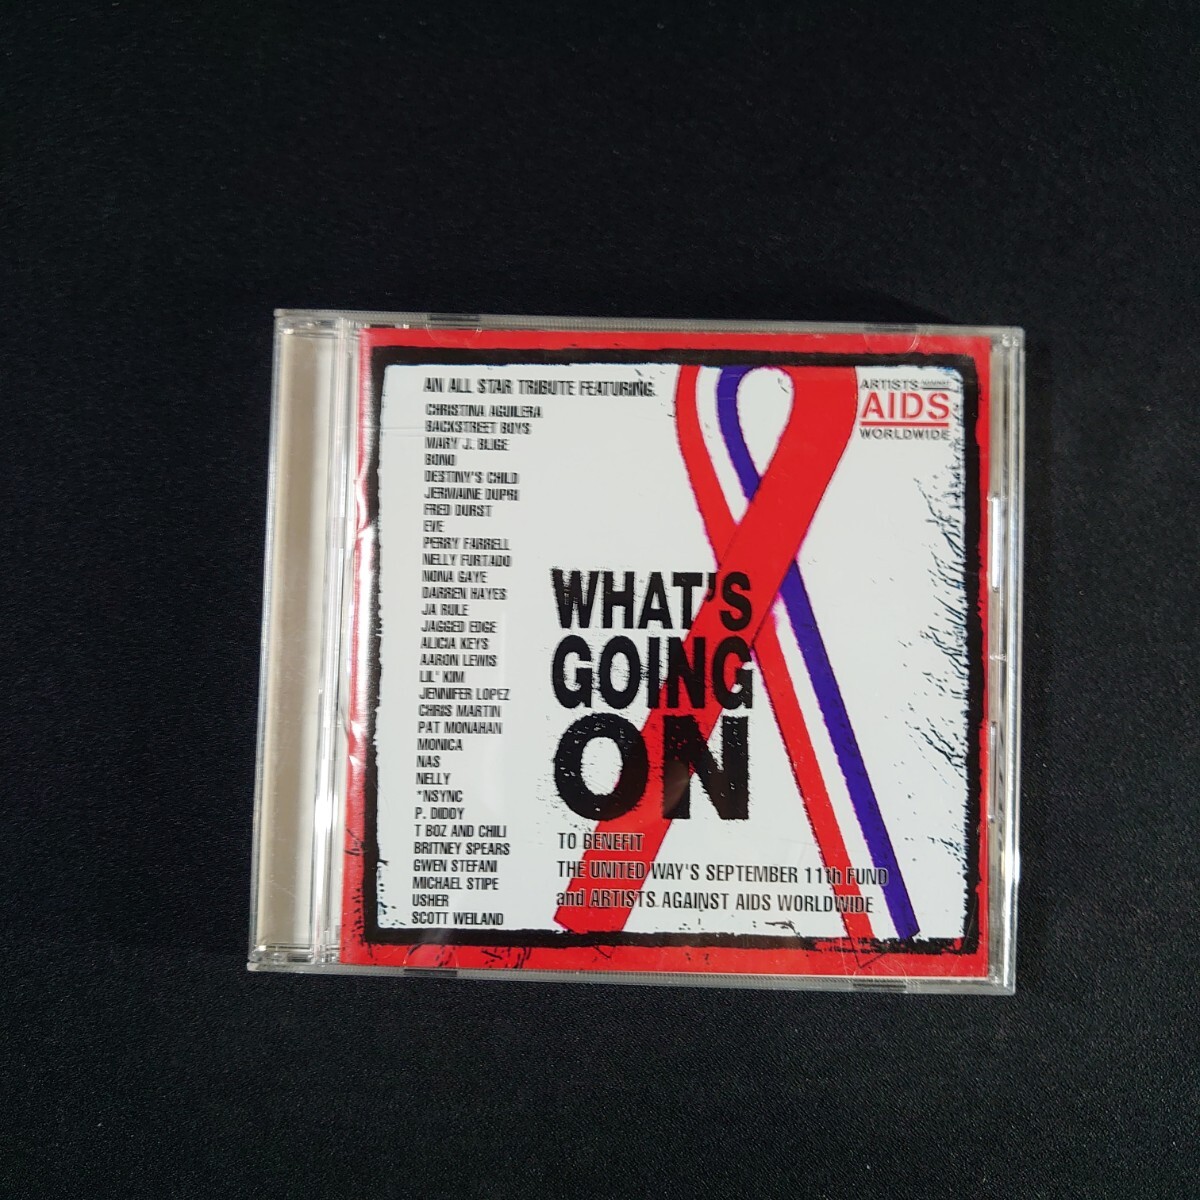 Artists Against AIDS Worldwide『What's Going On』All Star Tribute/CD/#YECD2416_画像1